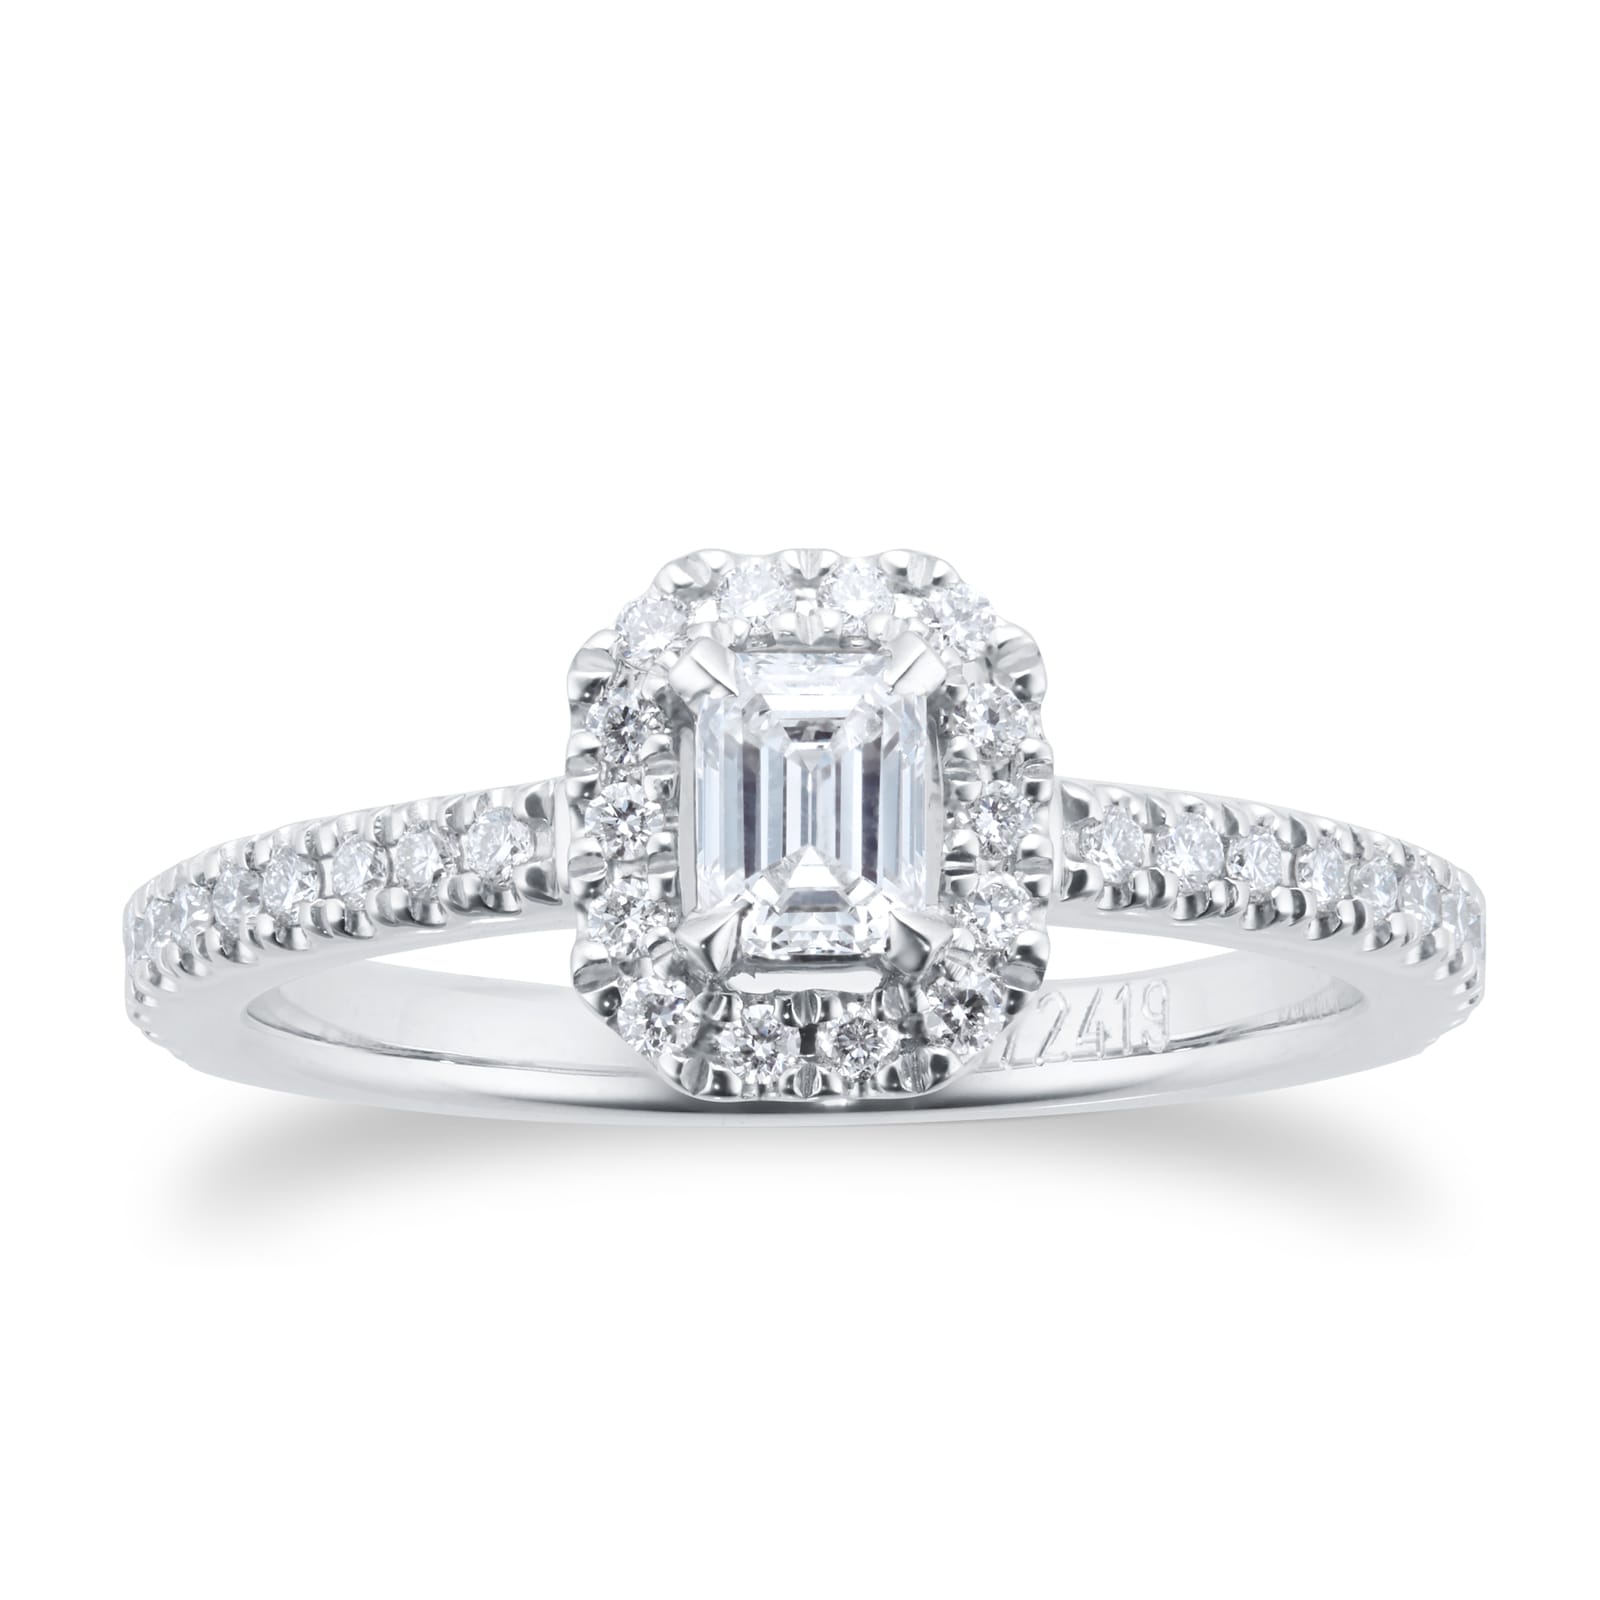 Amelia Engagement Ring With Diamond Band 0.50 Carat Total Weight - Ring Size L